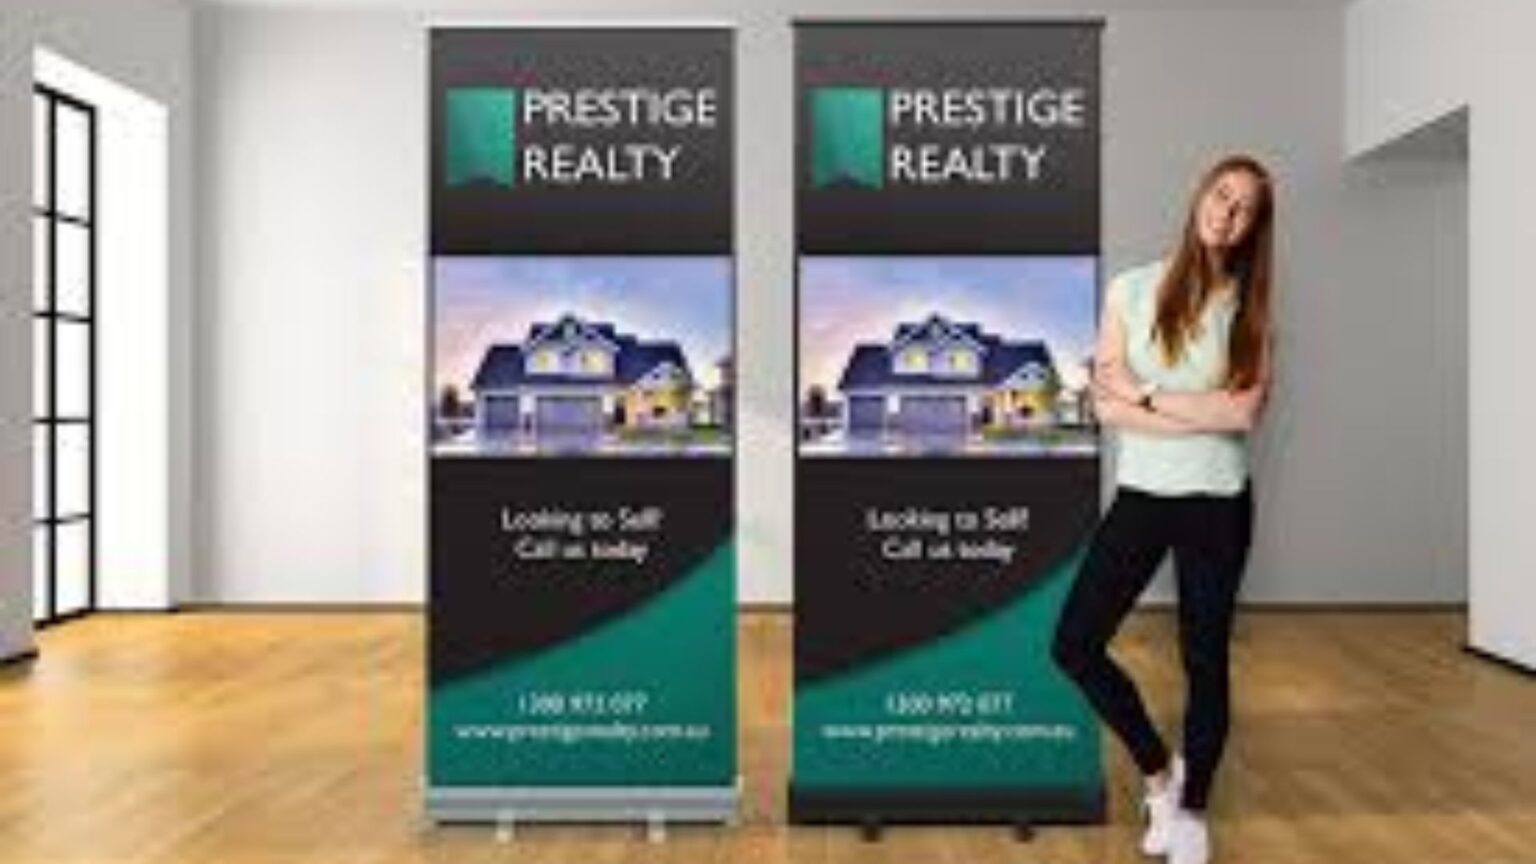 What are the benefits of retractable pull-up banner stands?